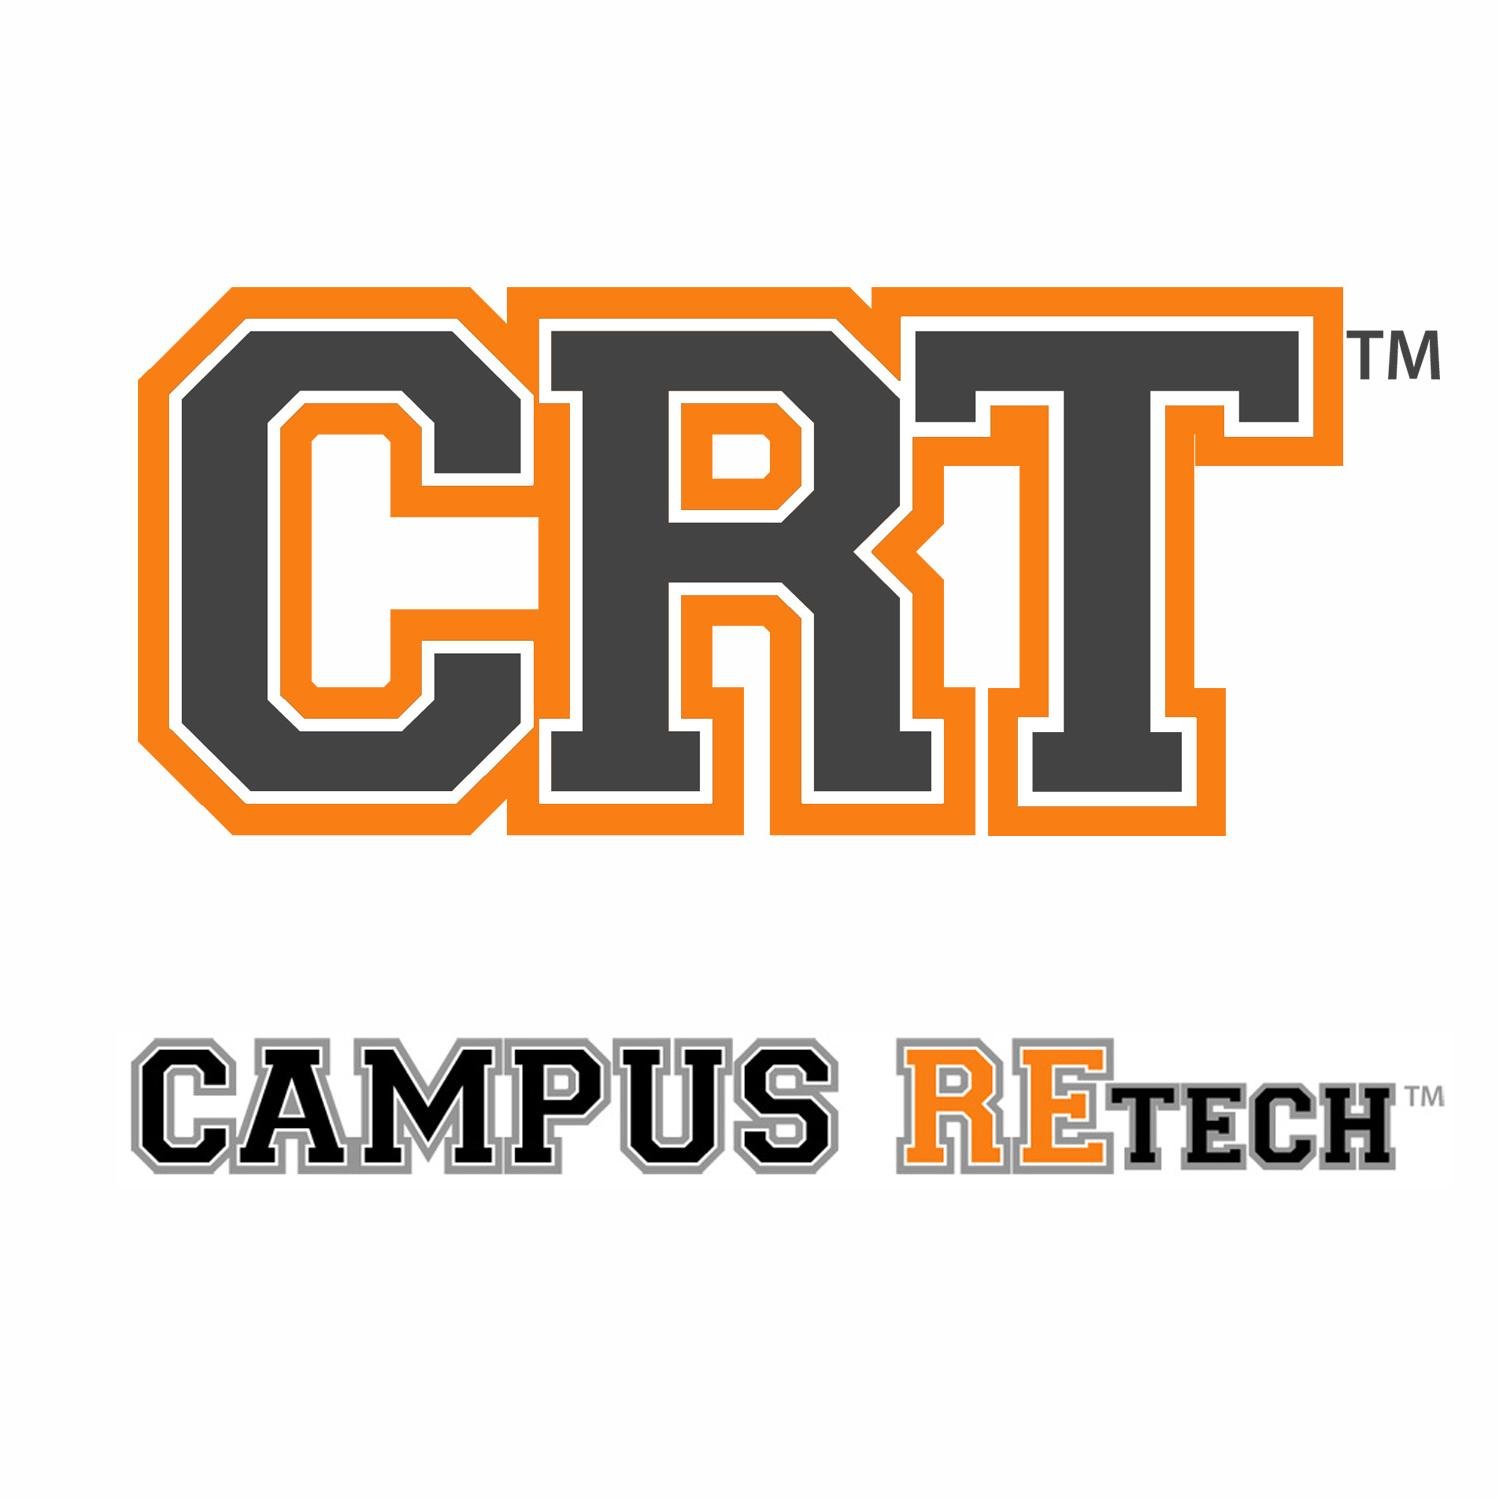 Campus ReTECH buys used Smart Phones, Laptops & Tablets, we also sell all reconditioned & tested Smart Phones, Laptops and Tablets for a fraction of retail $